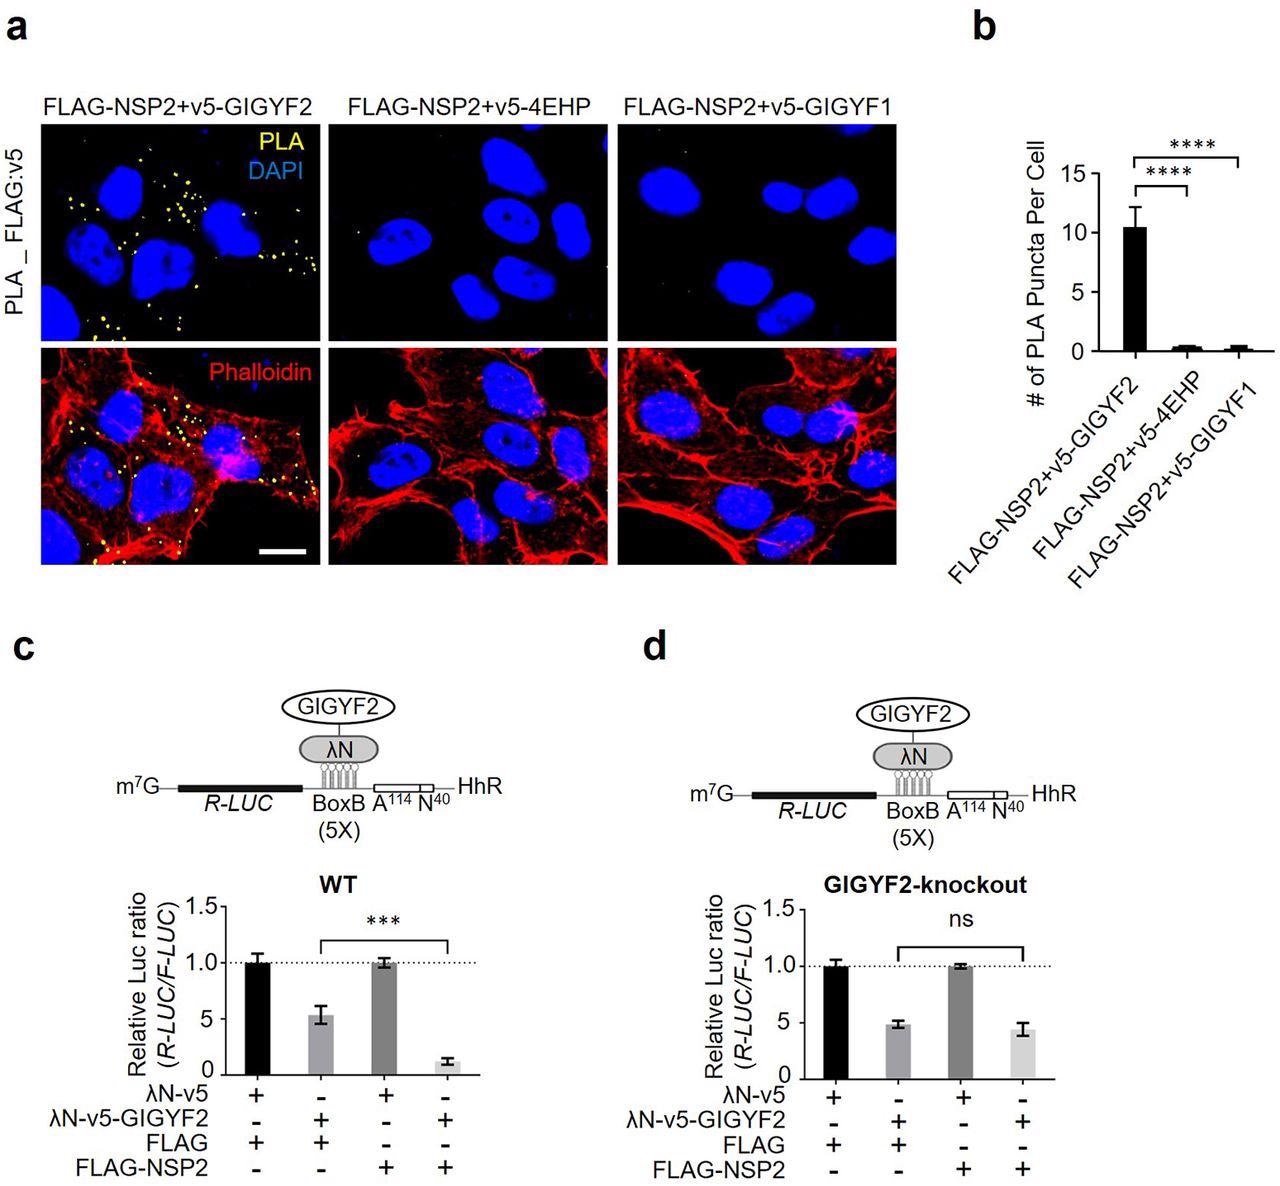 NSP2 bolsters the GIGYF2/4EHP translational repression complex. (a) PLA detection of NSP2-GIGYF2 interactions visible as fluorescent punctate in HEK293T cells transfected with vectors expressing v5-tagged GIGYF2, 4EHP, or GIGYF1 together with FLAG-NSP2. 24 h post-transfection cells were fixed and subjected to PLA using FLAG and v5 antibodies. PLA signals are shown in yellow. Nucleus and actin cytoskeleton were counterstained with DAPI (blue) and phalloidin (red), respectively. Scale